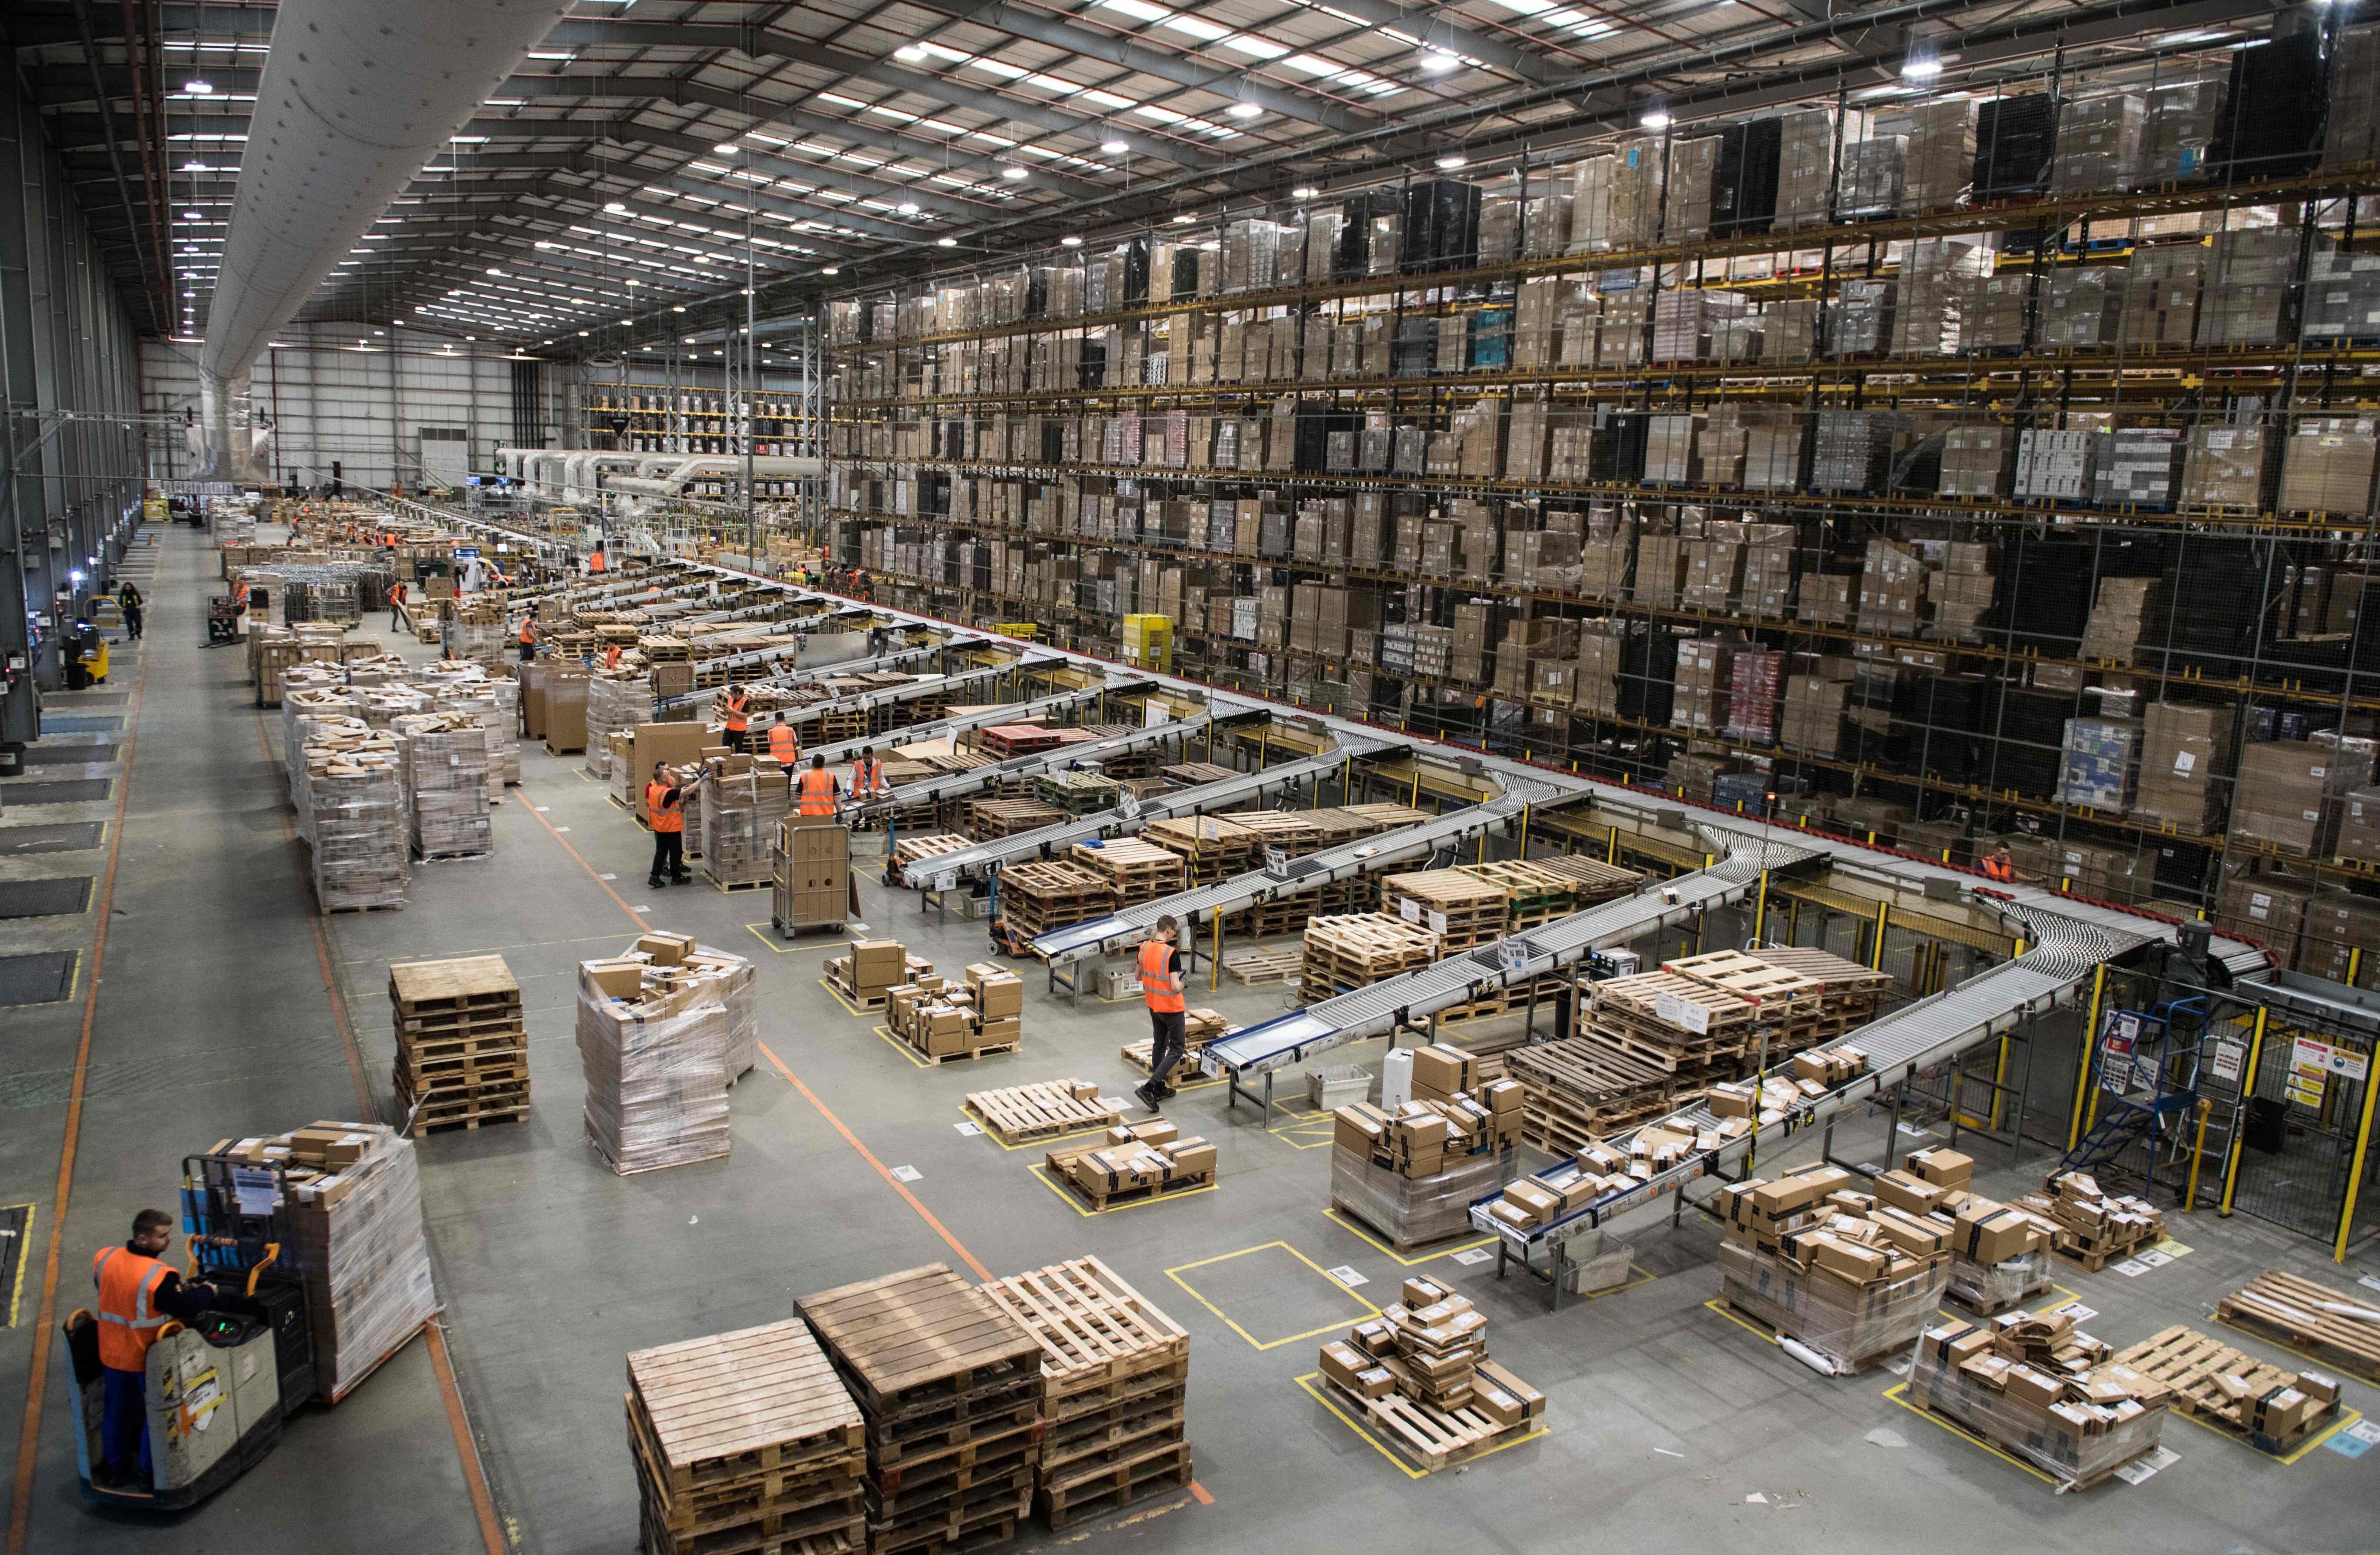 Workers prepare customer orders for dispatch as they work around goods stored inside an Amazon fulfilment centre in Peterborough, central England, on November 15, 2017. Photo: AFP